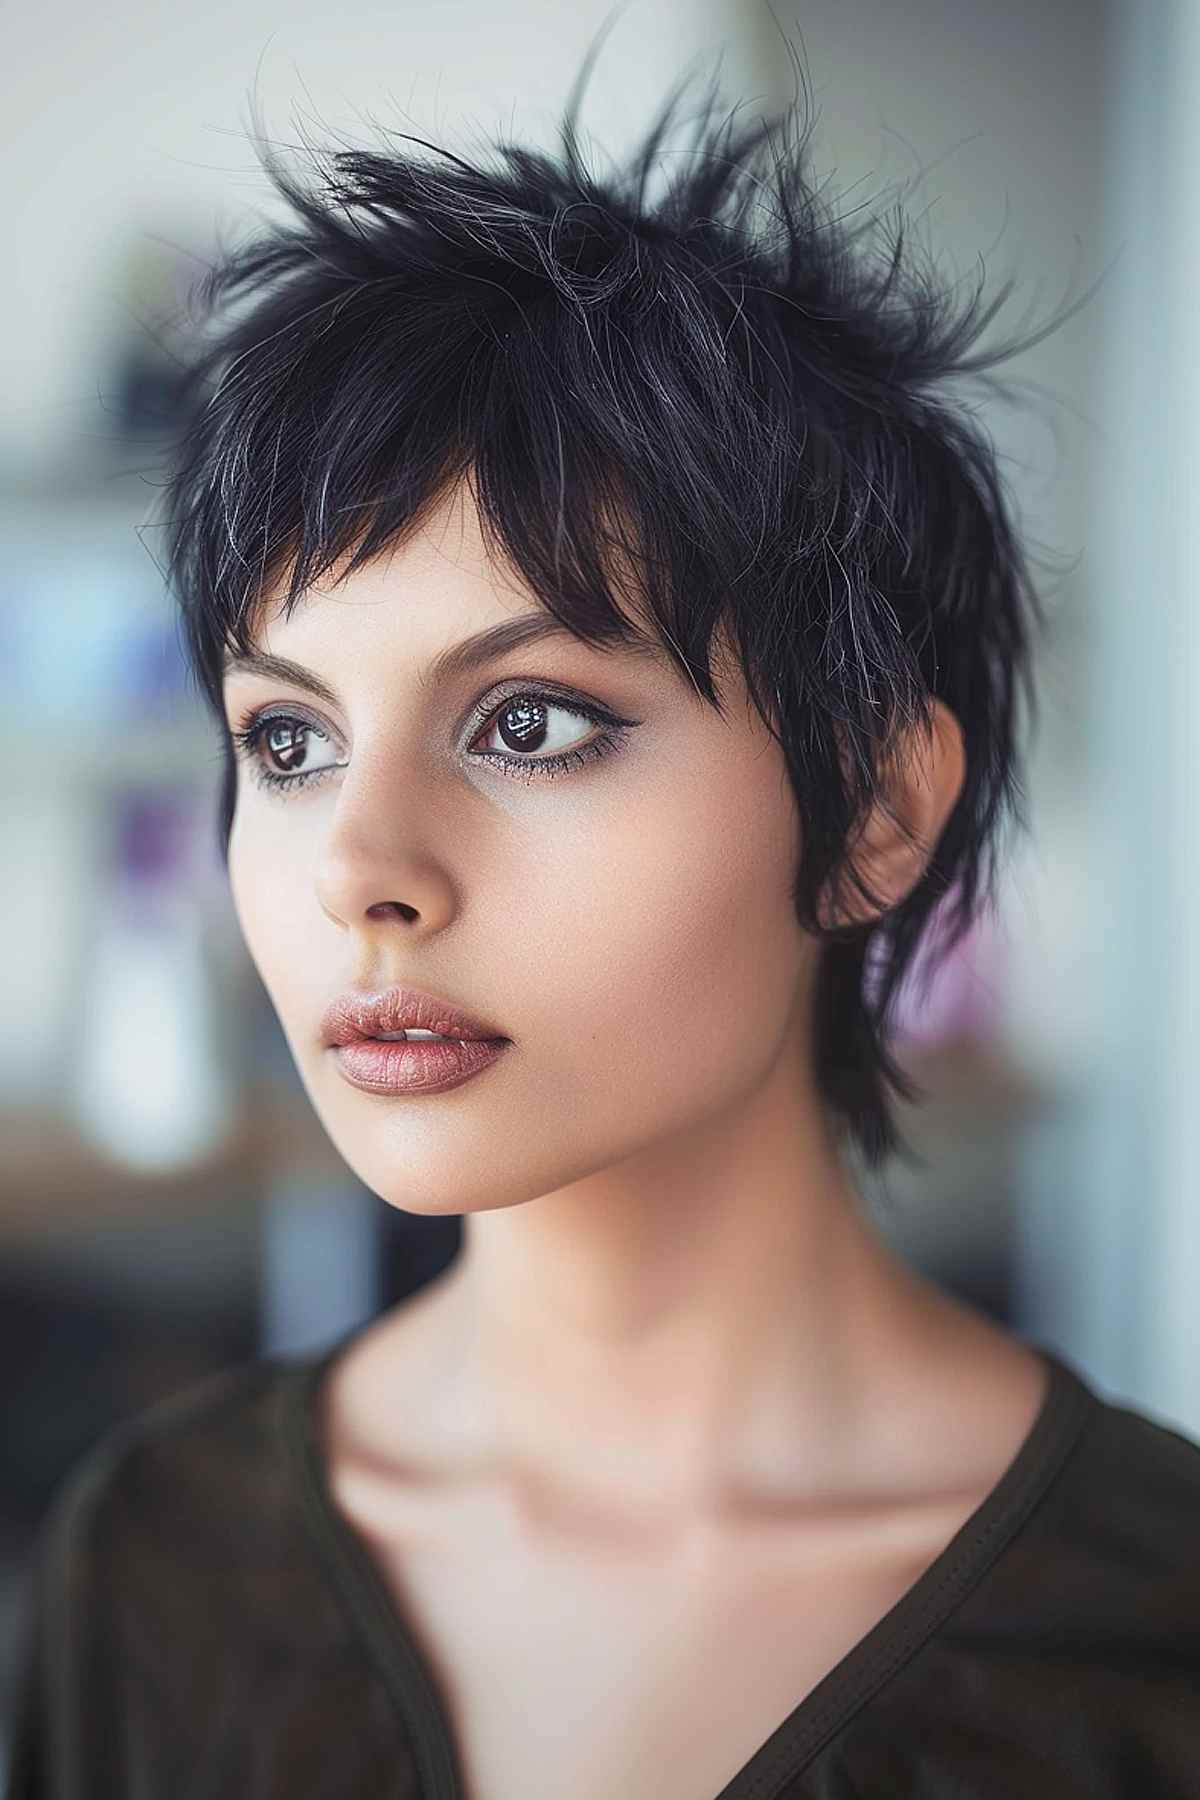 Shaggy pixie elf haircut with choppy layers and a bold dark color.